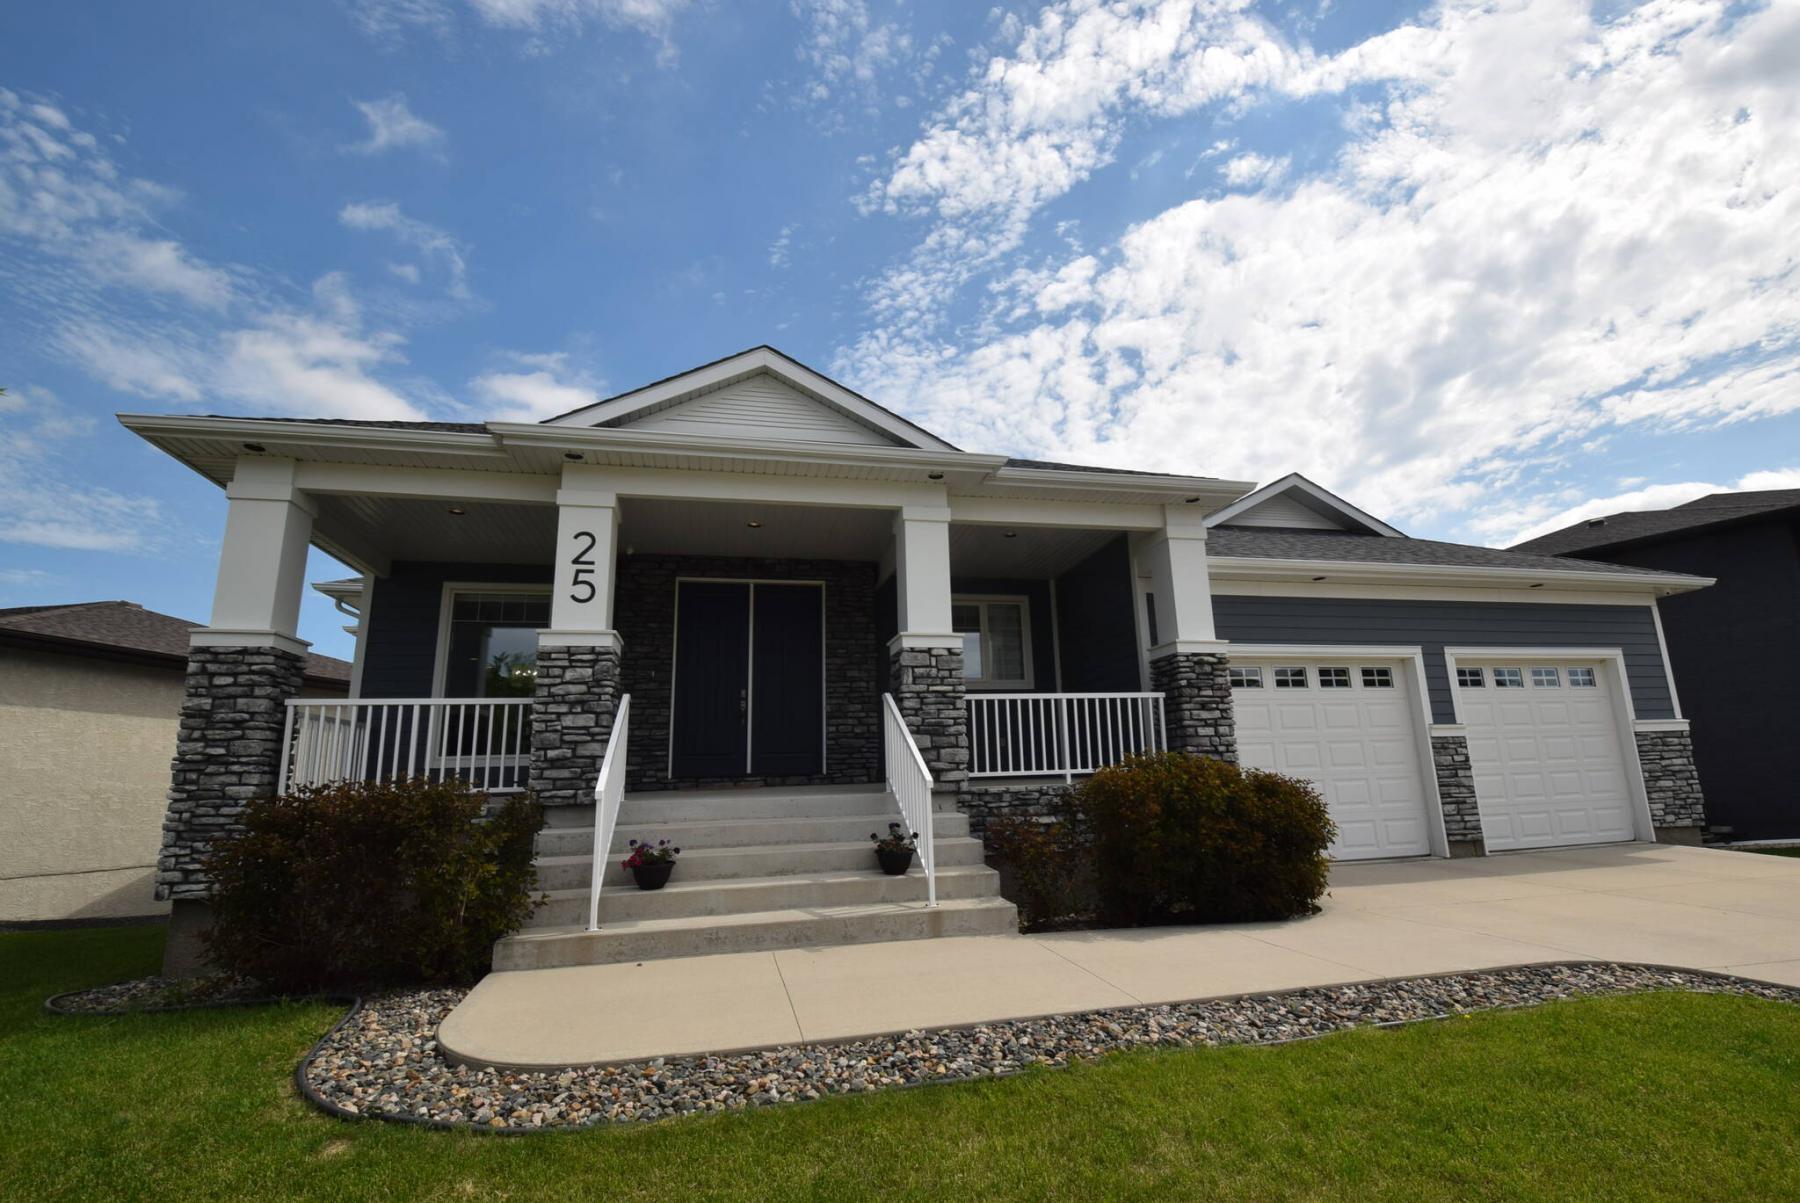 <p>PHOTOS BY TODD LEWYS / WINNIPEG FREE PRESS</p><p>Custom-built in 2012 by Gino&rsquo;s Homes, this raised bungalow is in show home condition, and is situated on one of the best-positioned lots on the street.</p>